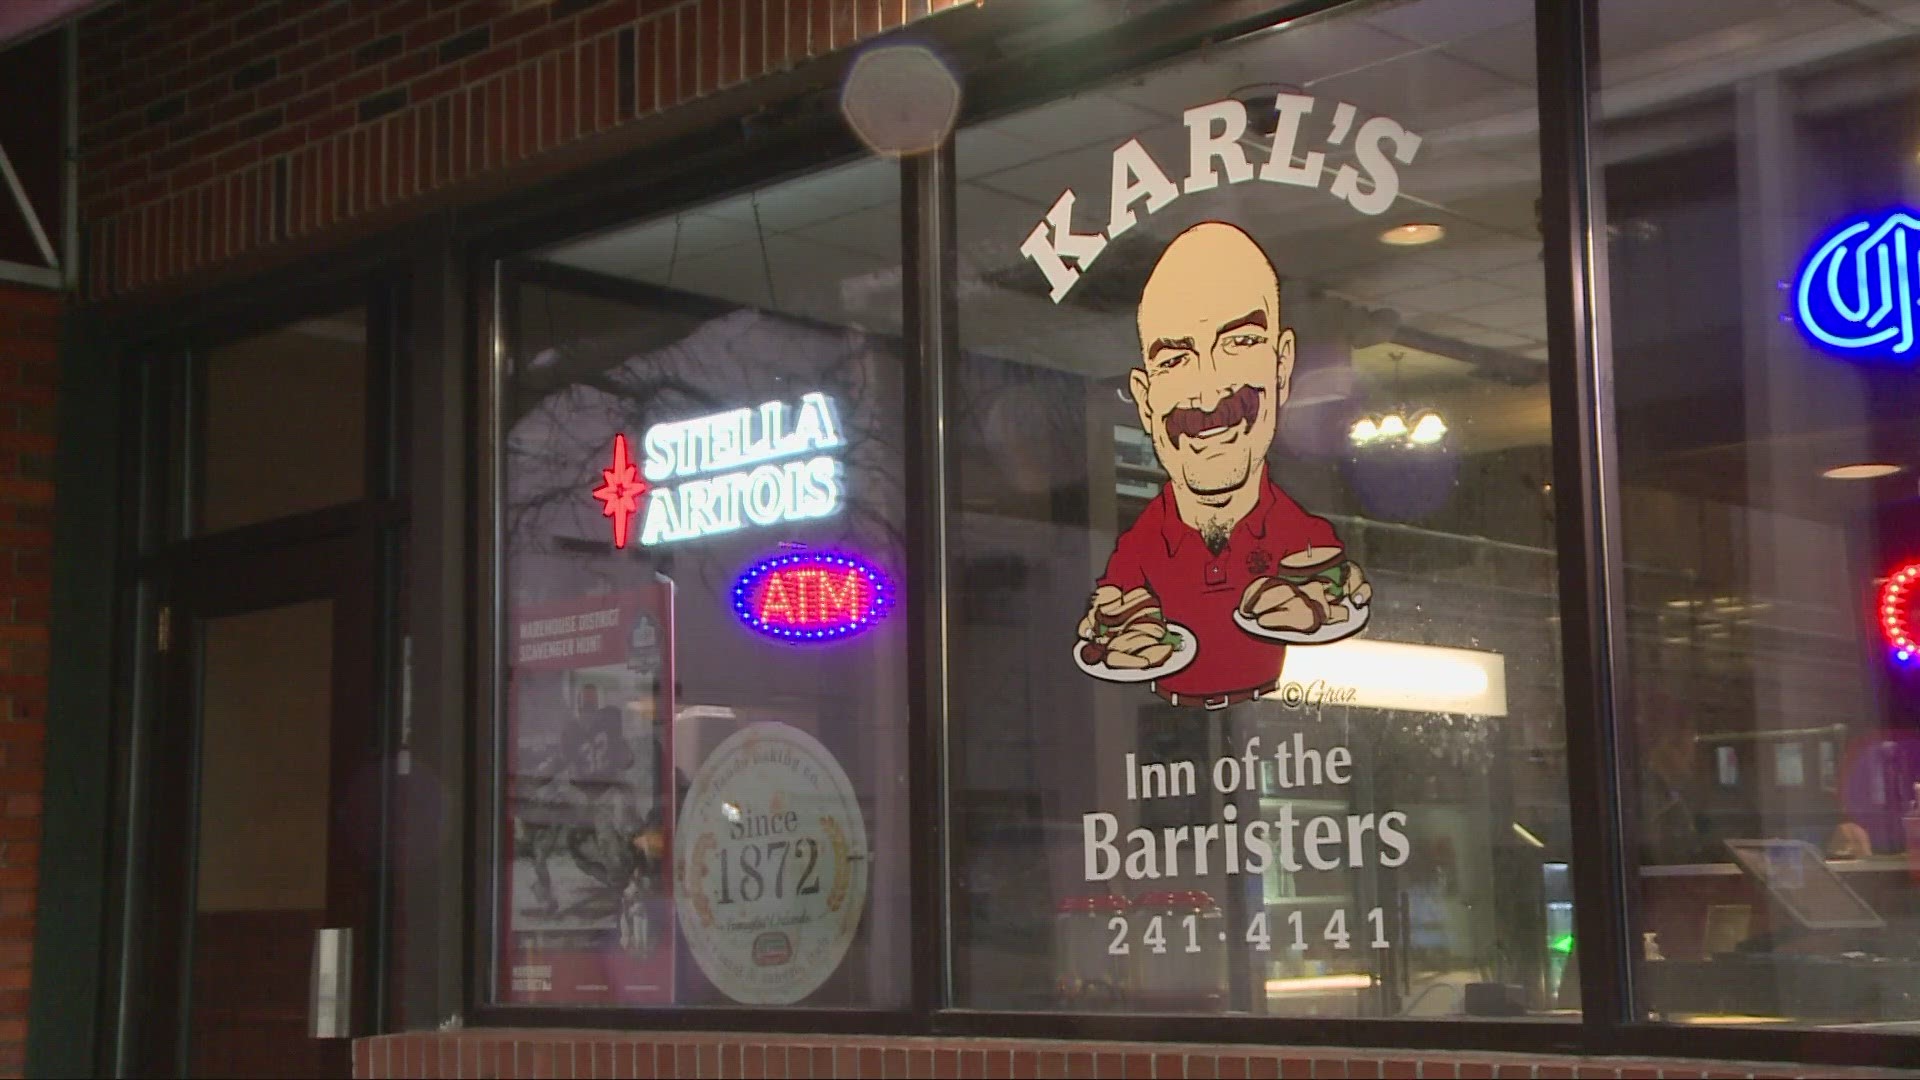 Karl's Inn of the Barristers will close after serving customers on St. Patrick’s Day. However, Barrister's Deli on Hamilton Avenue will remain open.